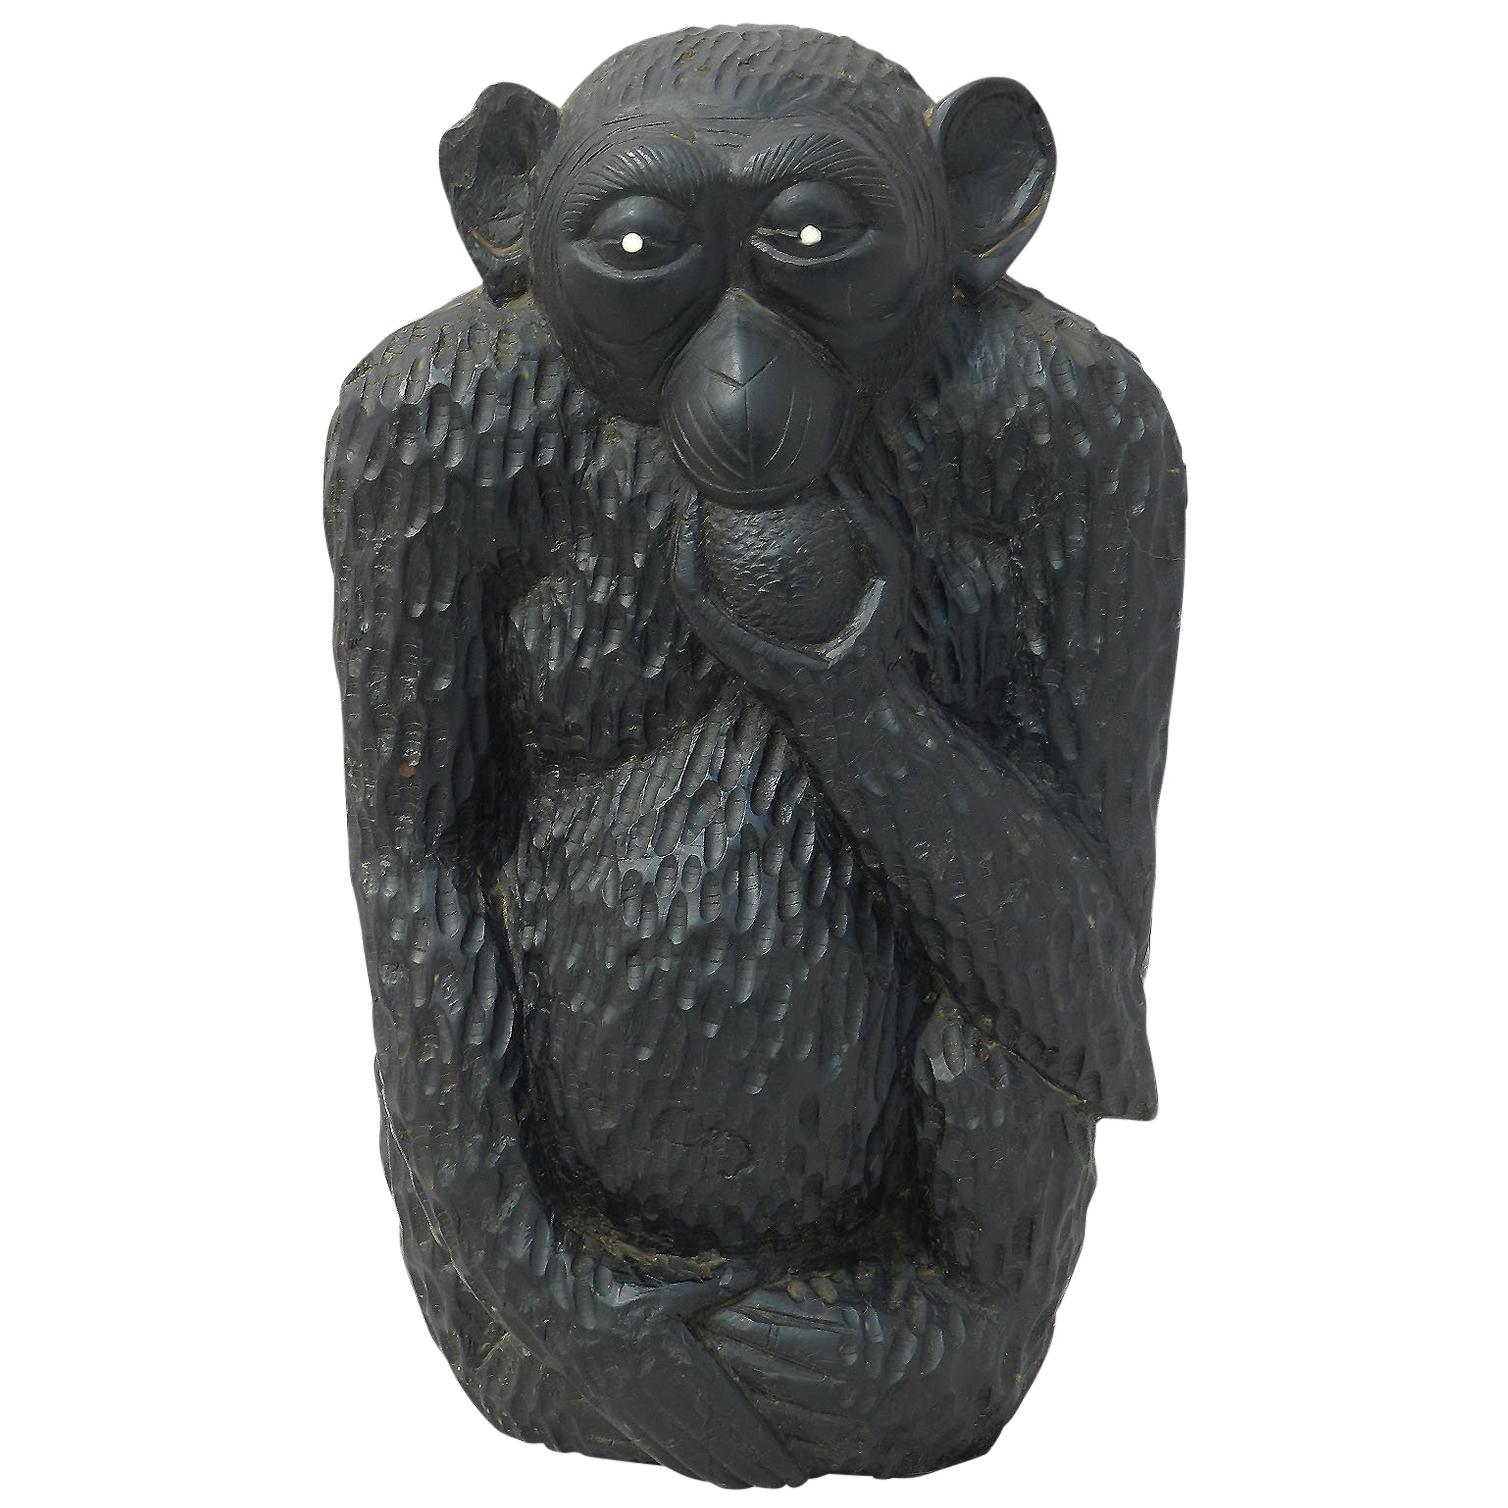 Monkey Sculpture Early 20th Century African Hand Carved Wood One of a Kind